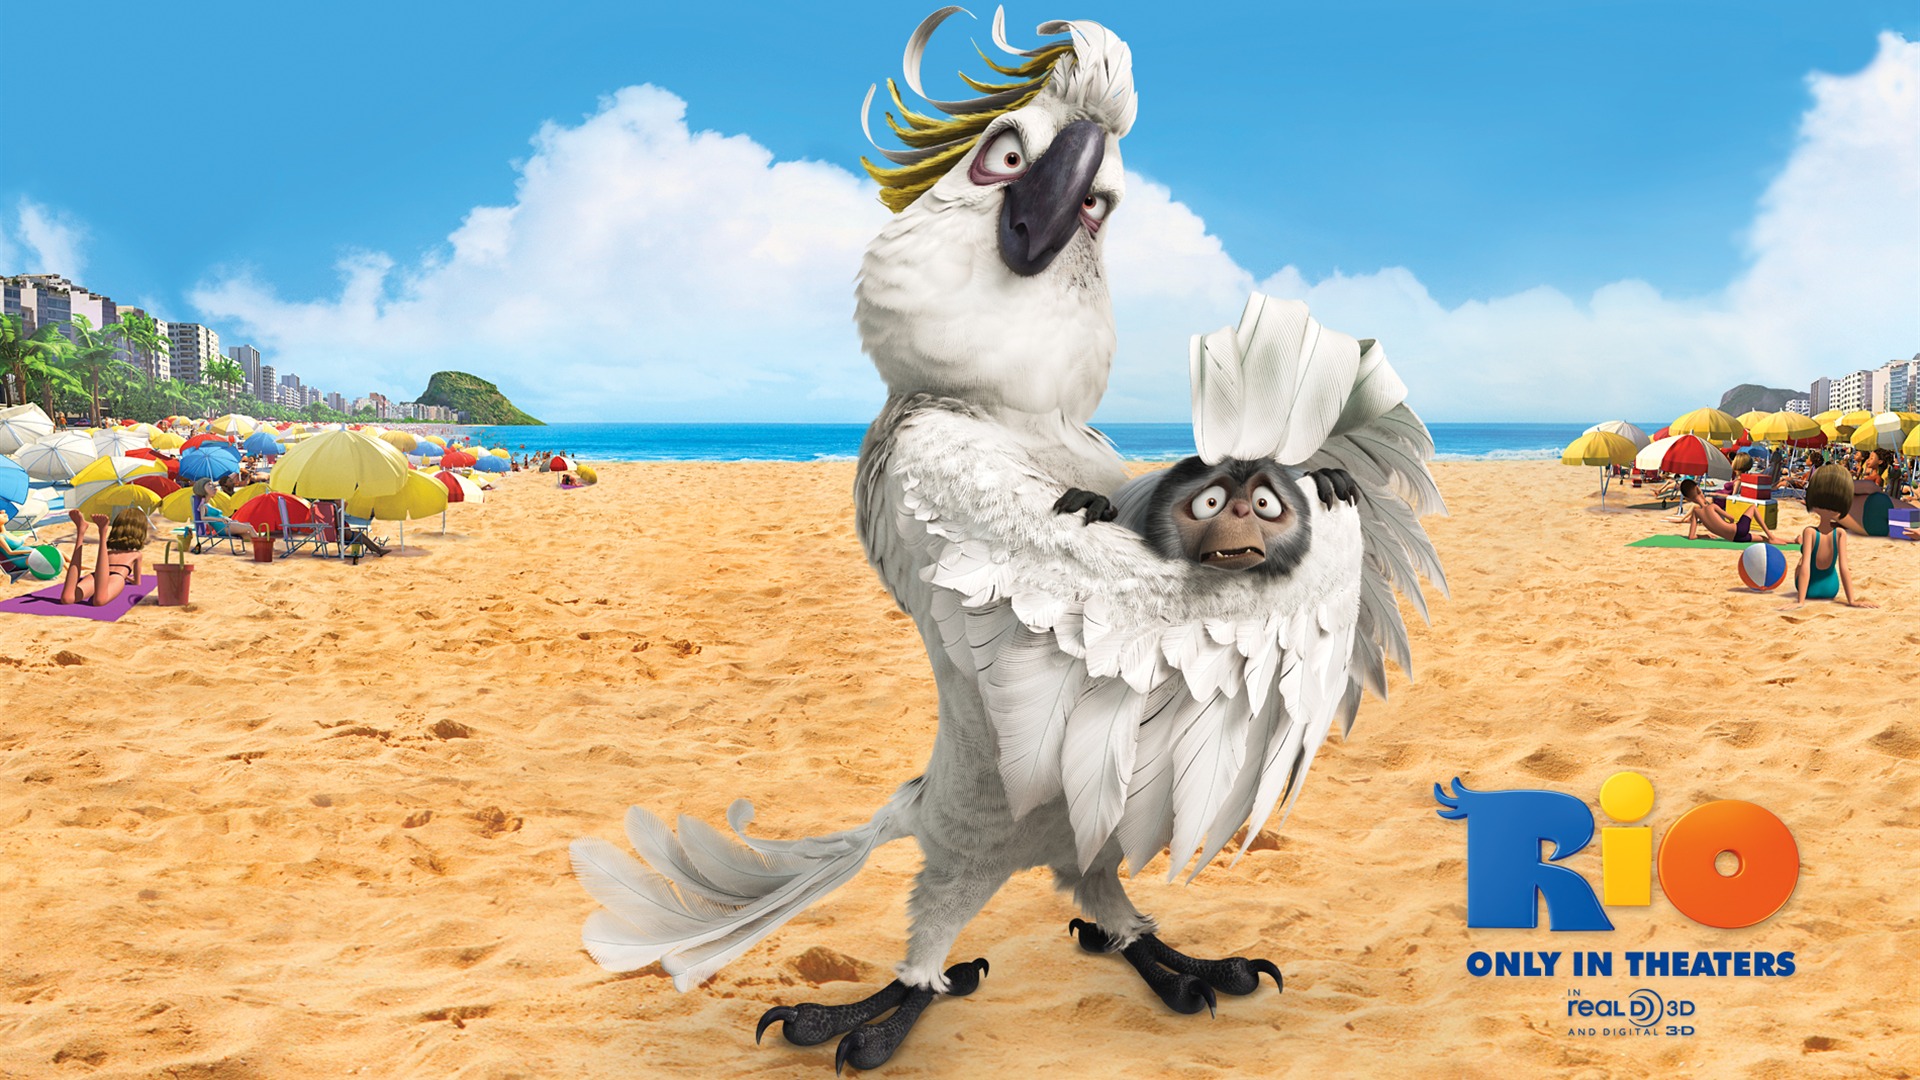 Rio 2011 wallpapers #12 - 1920x1080